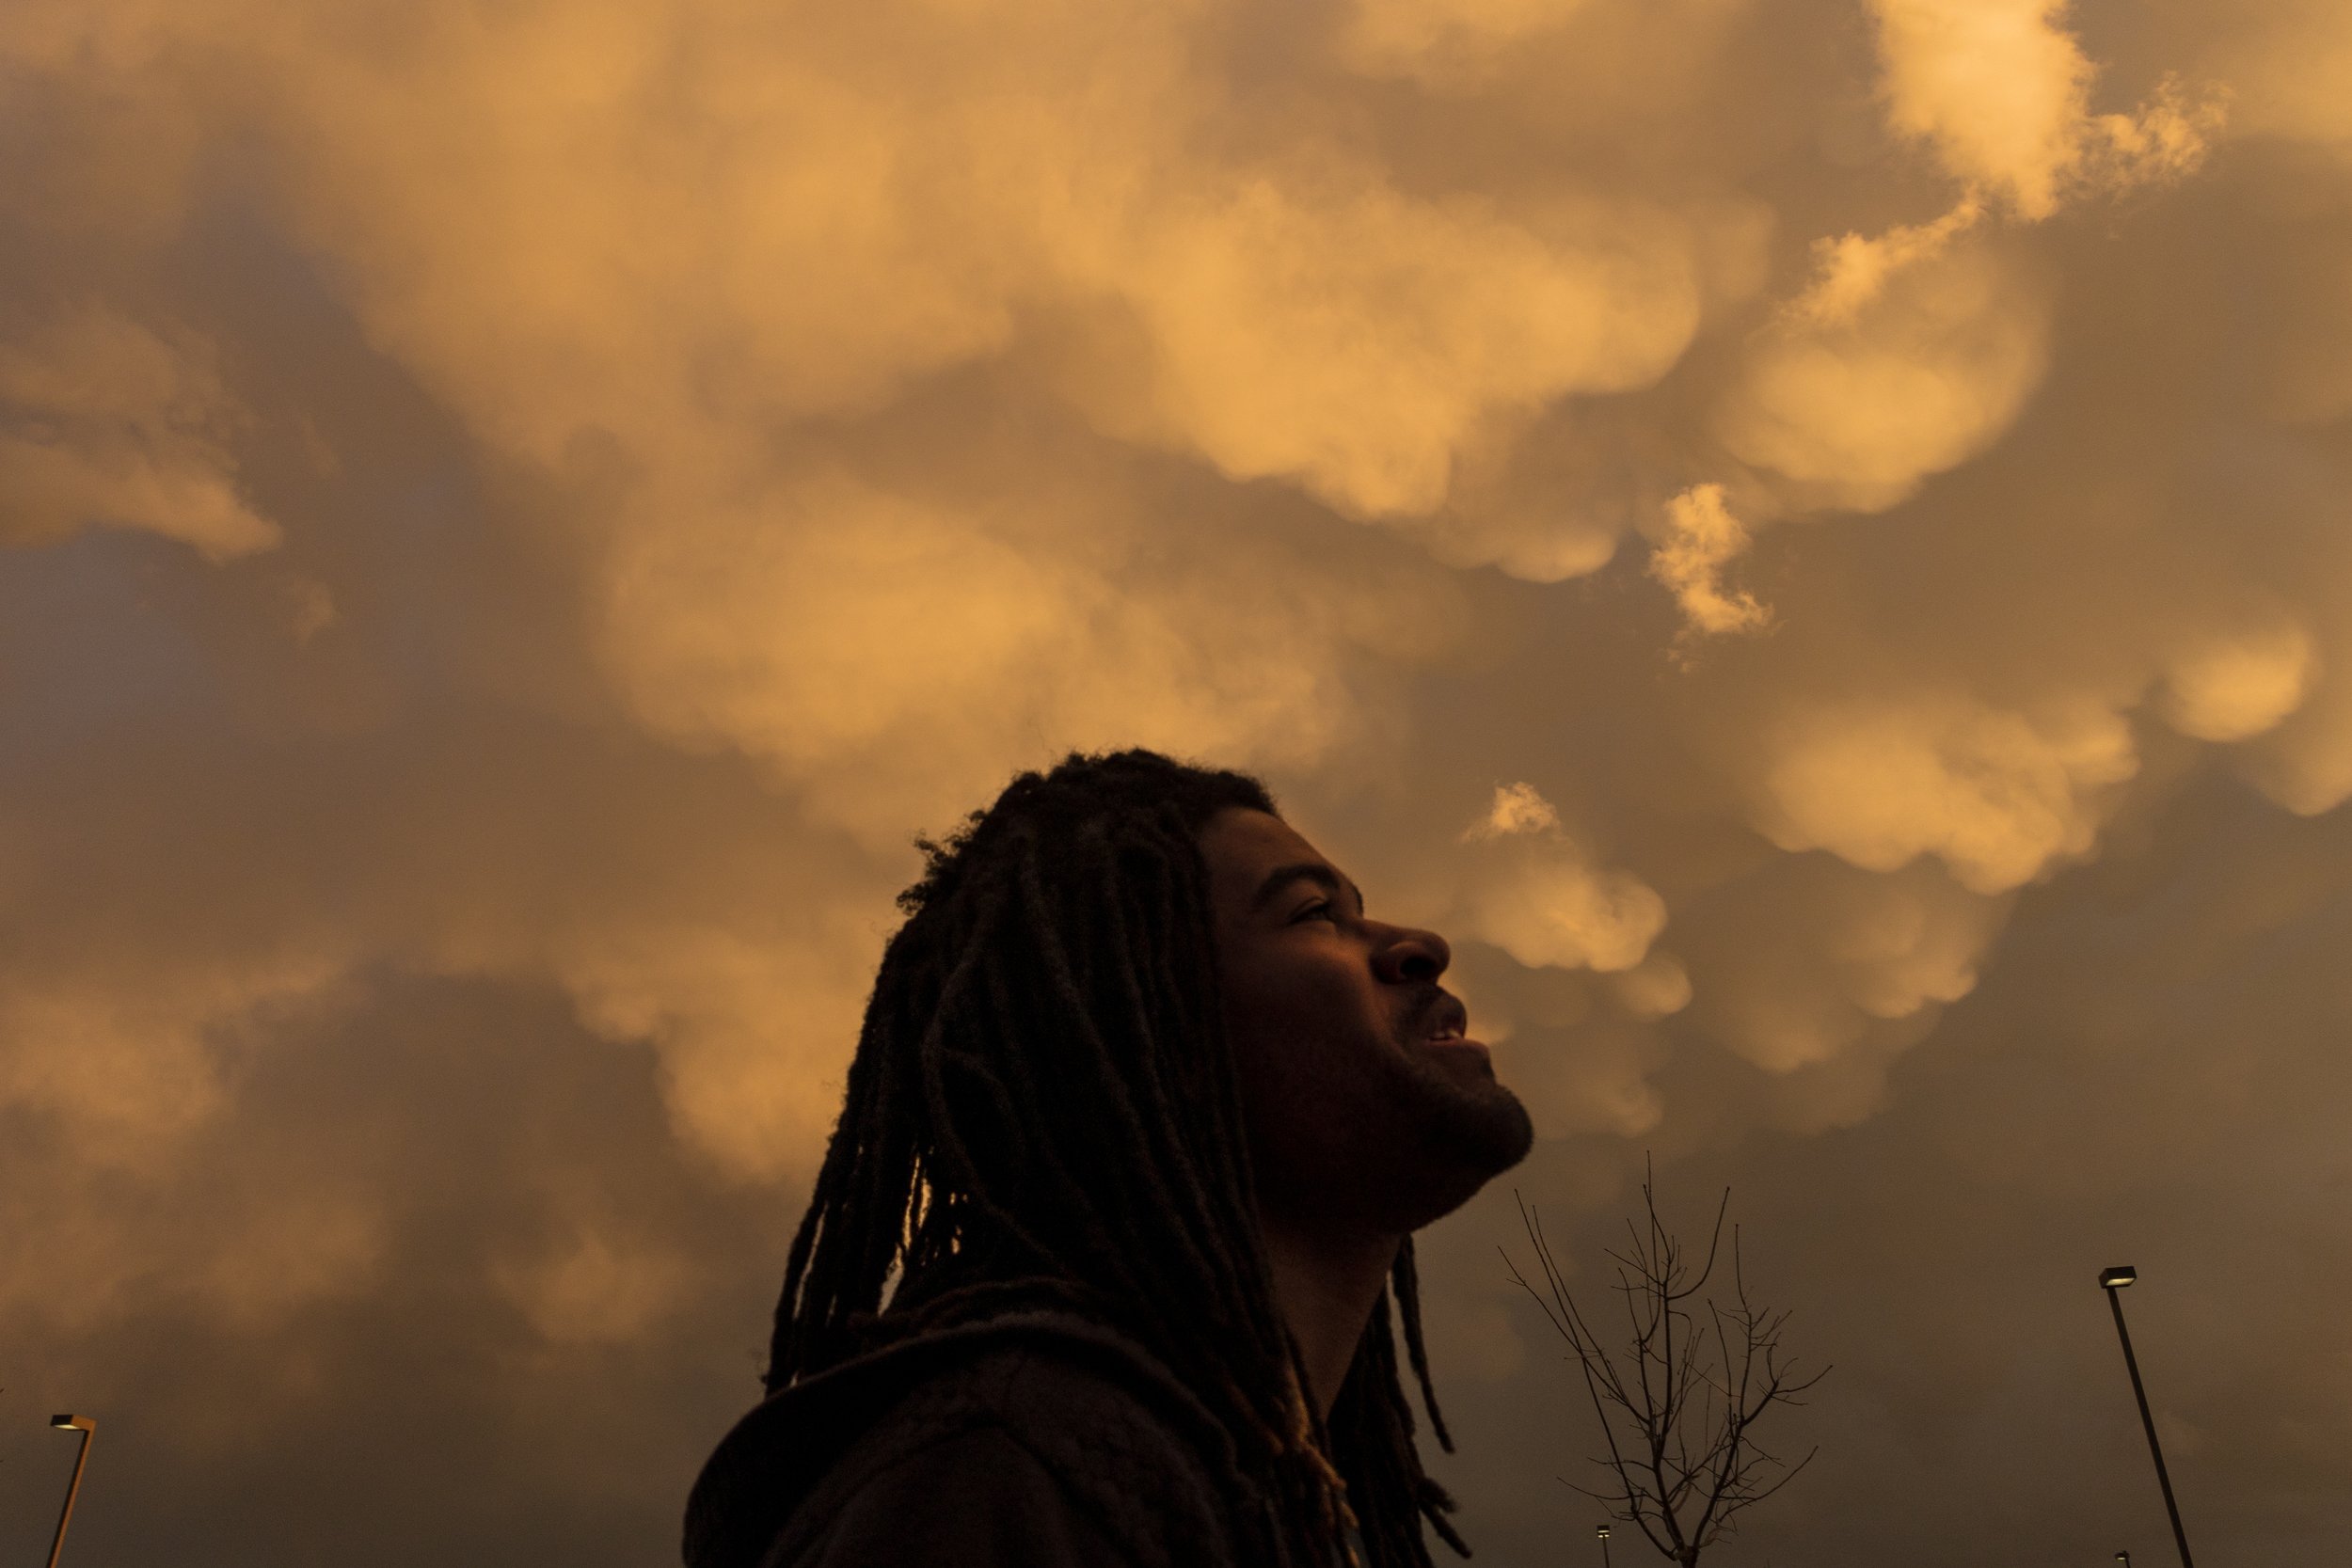  Quinten Scott looks up into the sky before a vigil is held for his brother Marvin Scott III at the Collin County Jail, where Marvin died one year ago. “This is maybe the second time in my life that I’ve seen a rainbow,” says Quinten as the anticipat